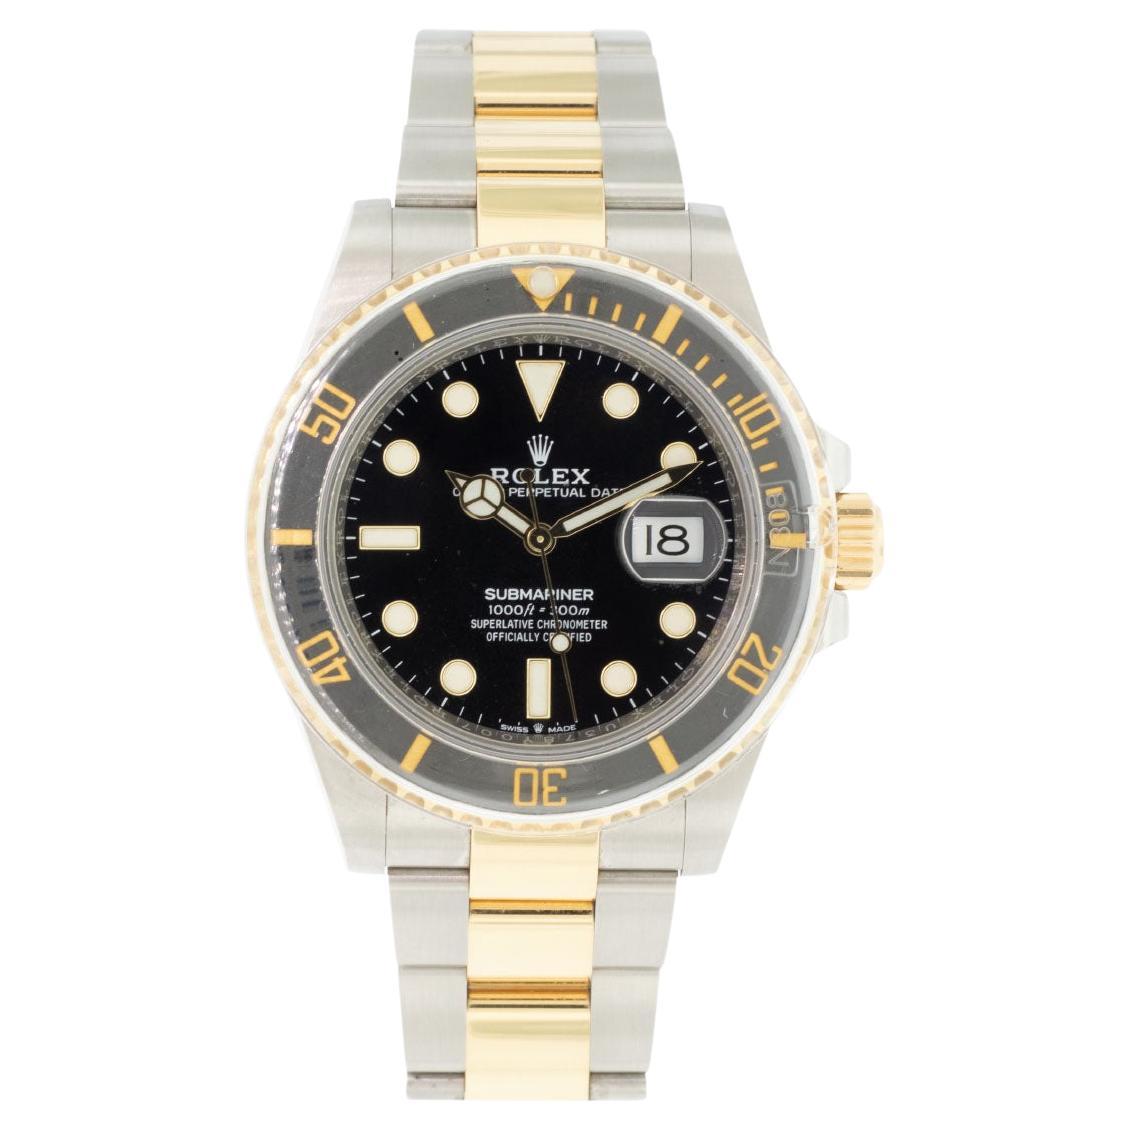 Rolex 126613LN Submariner Two Tone Black Dial Watch